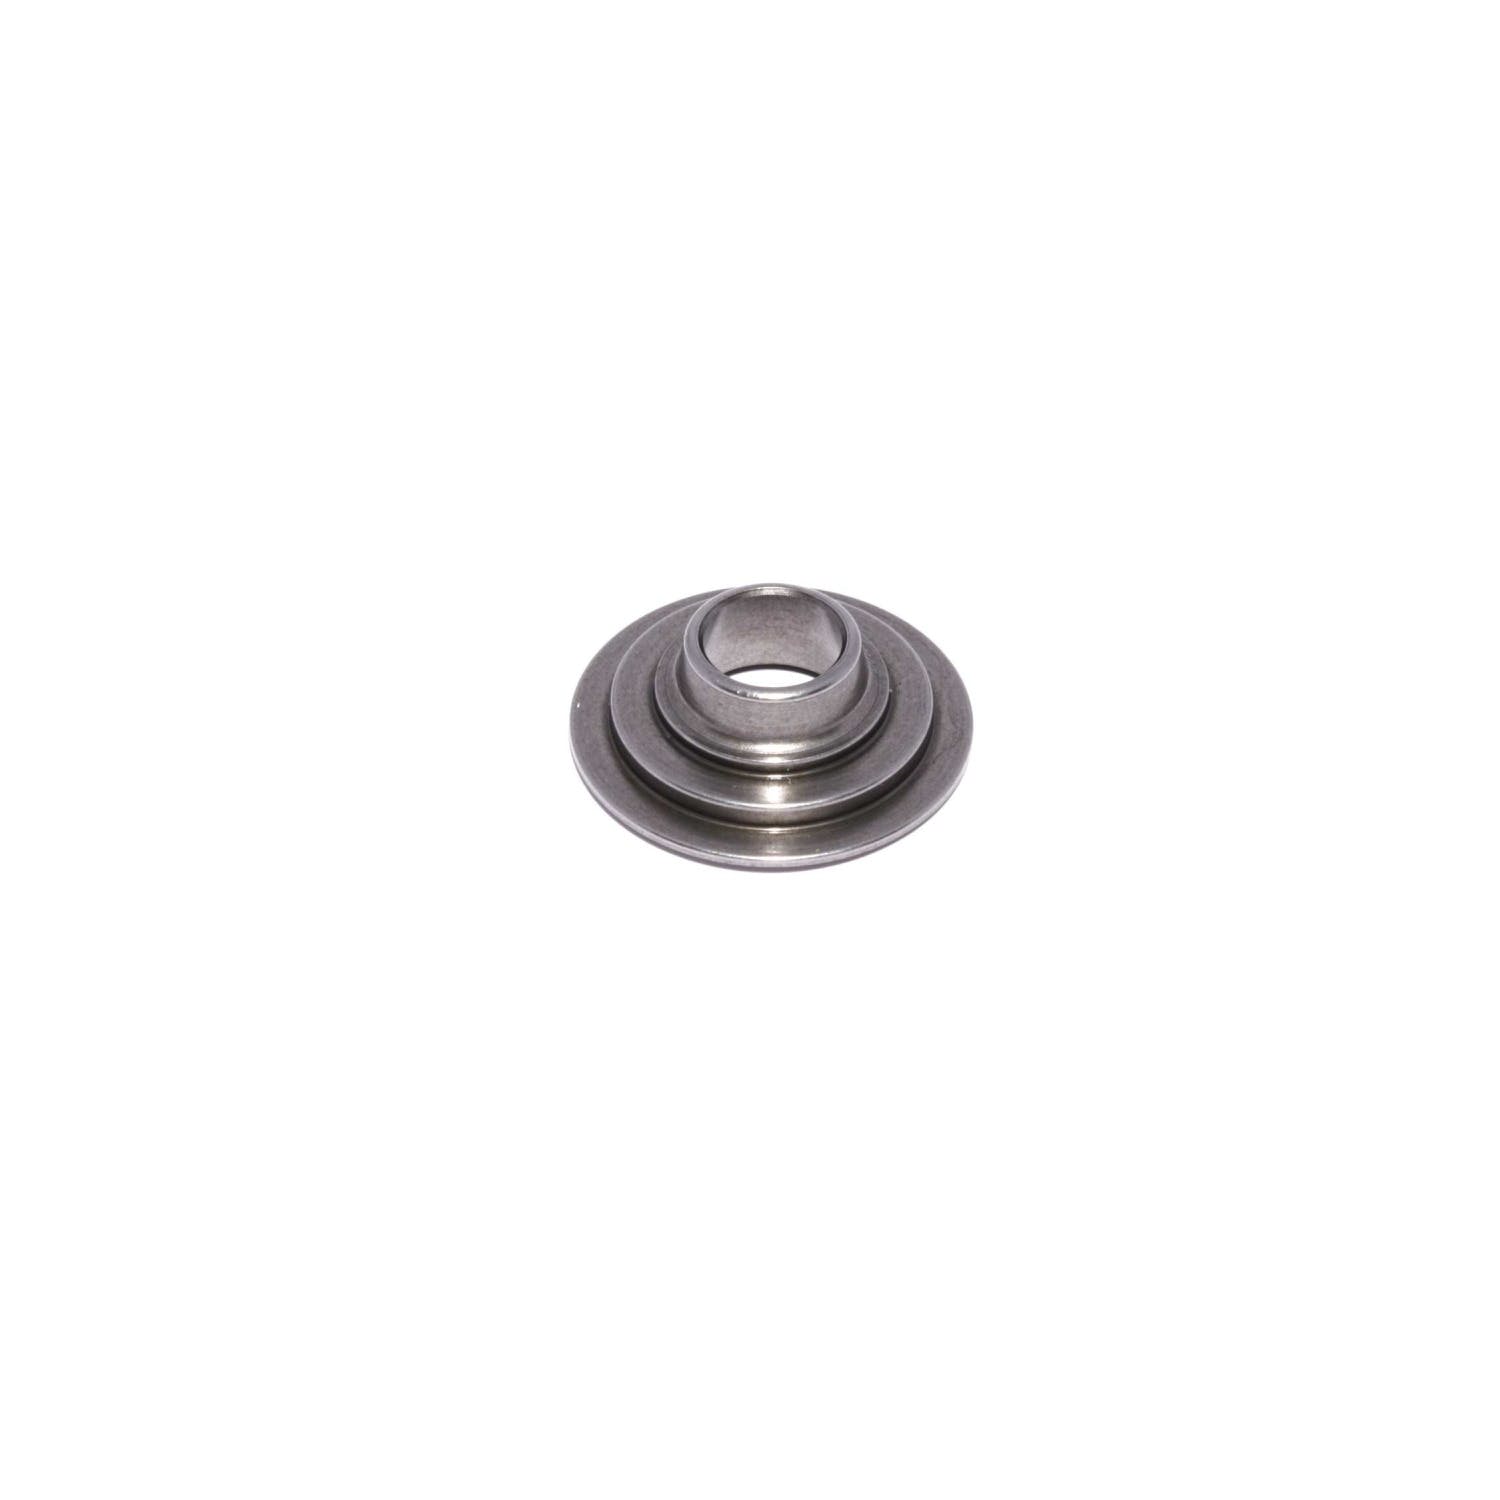 Competition Cams 1732-1 Lightweight Tool Steel Retainer